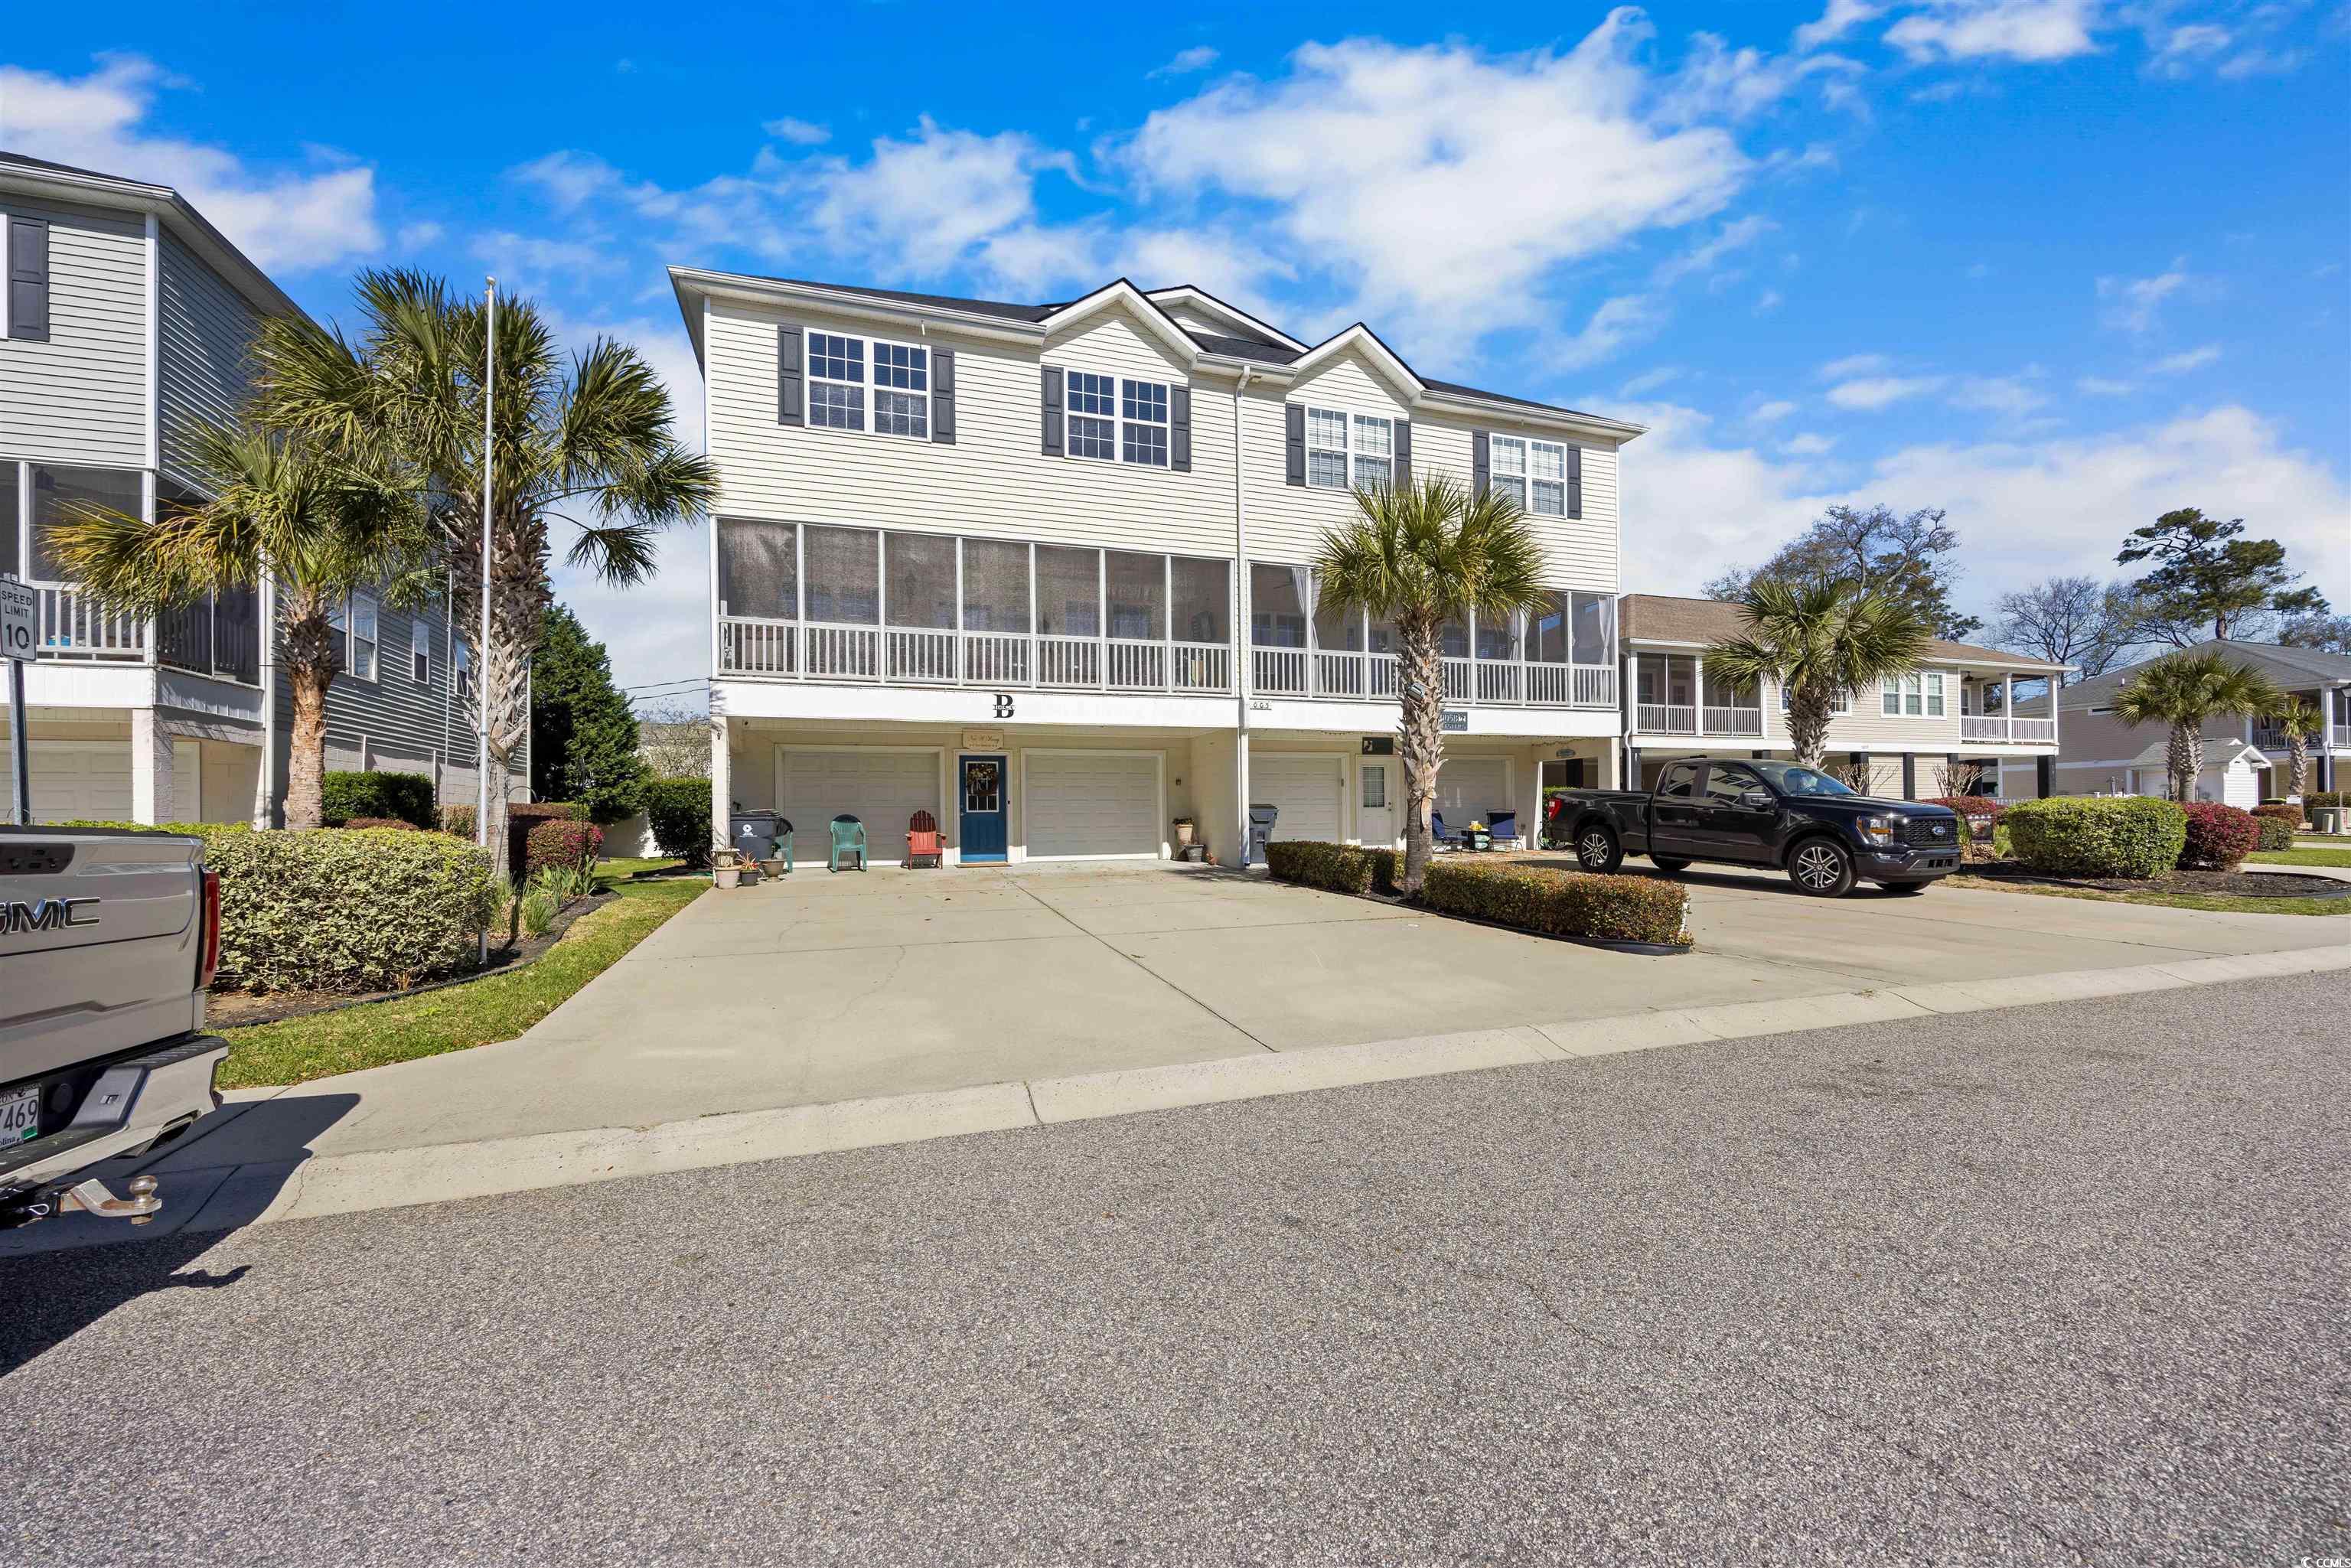 this is it, the one you've always dreamed about! located in the serene neighborhood of kelly court villas. just a short golf cart ride or walk to the beach with public access, golf cart parking, and only 1.4 miles to the garden city pier. its perfectly located, kelly court villas offers 2 community pools and a low maintenance lifestyle as lawn care is handled by the hoa. this pristine residence has never been rented and has had only one owner. it is a rare find with 4005 sq. ft under roof. the bottom floor consists of an enclosed garage large enough for 2 cars, your golf cart, and all your beach toys.  the entrance door leads to a stairwell with access to the second floor. also on this level is a laundry room, hallway to the door leading out to the rear of the unit, and a storage room containing the hot water heater. on the second level, your will find a half bath, master bedroom, master bath with walk-in shower and whirlpool tub, and master closet. towards the front of the unit is the open floor plan living room, dining and kitchen. a screened porch stretches across the front of the unit. it is perfect for rocking and watching the palm trees sway as the gentle ocean breeze blows through. the third floor consists of a 2nd living area and 4 bedrooms each having its own bathroom. both hvac units have been replaced (2019 and 2021). the hot water heater was replaced in 2022 and the roof replaced in 2024. the carpet downstairs was replaced with waterproof laminate in 2019.  there's room for all of your family and friends. you won't find anything else this spacious at this price and this close to the beach. nothing else compares!